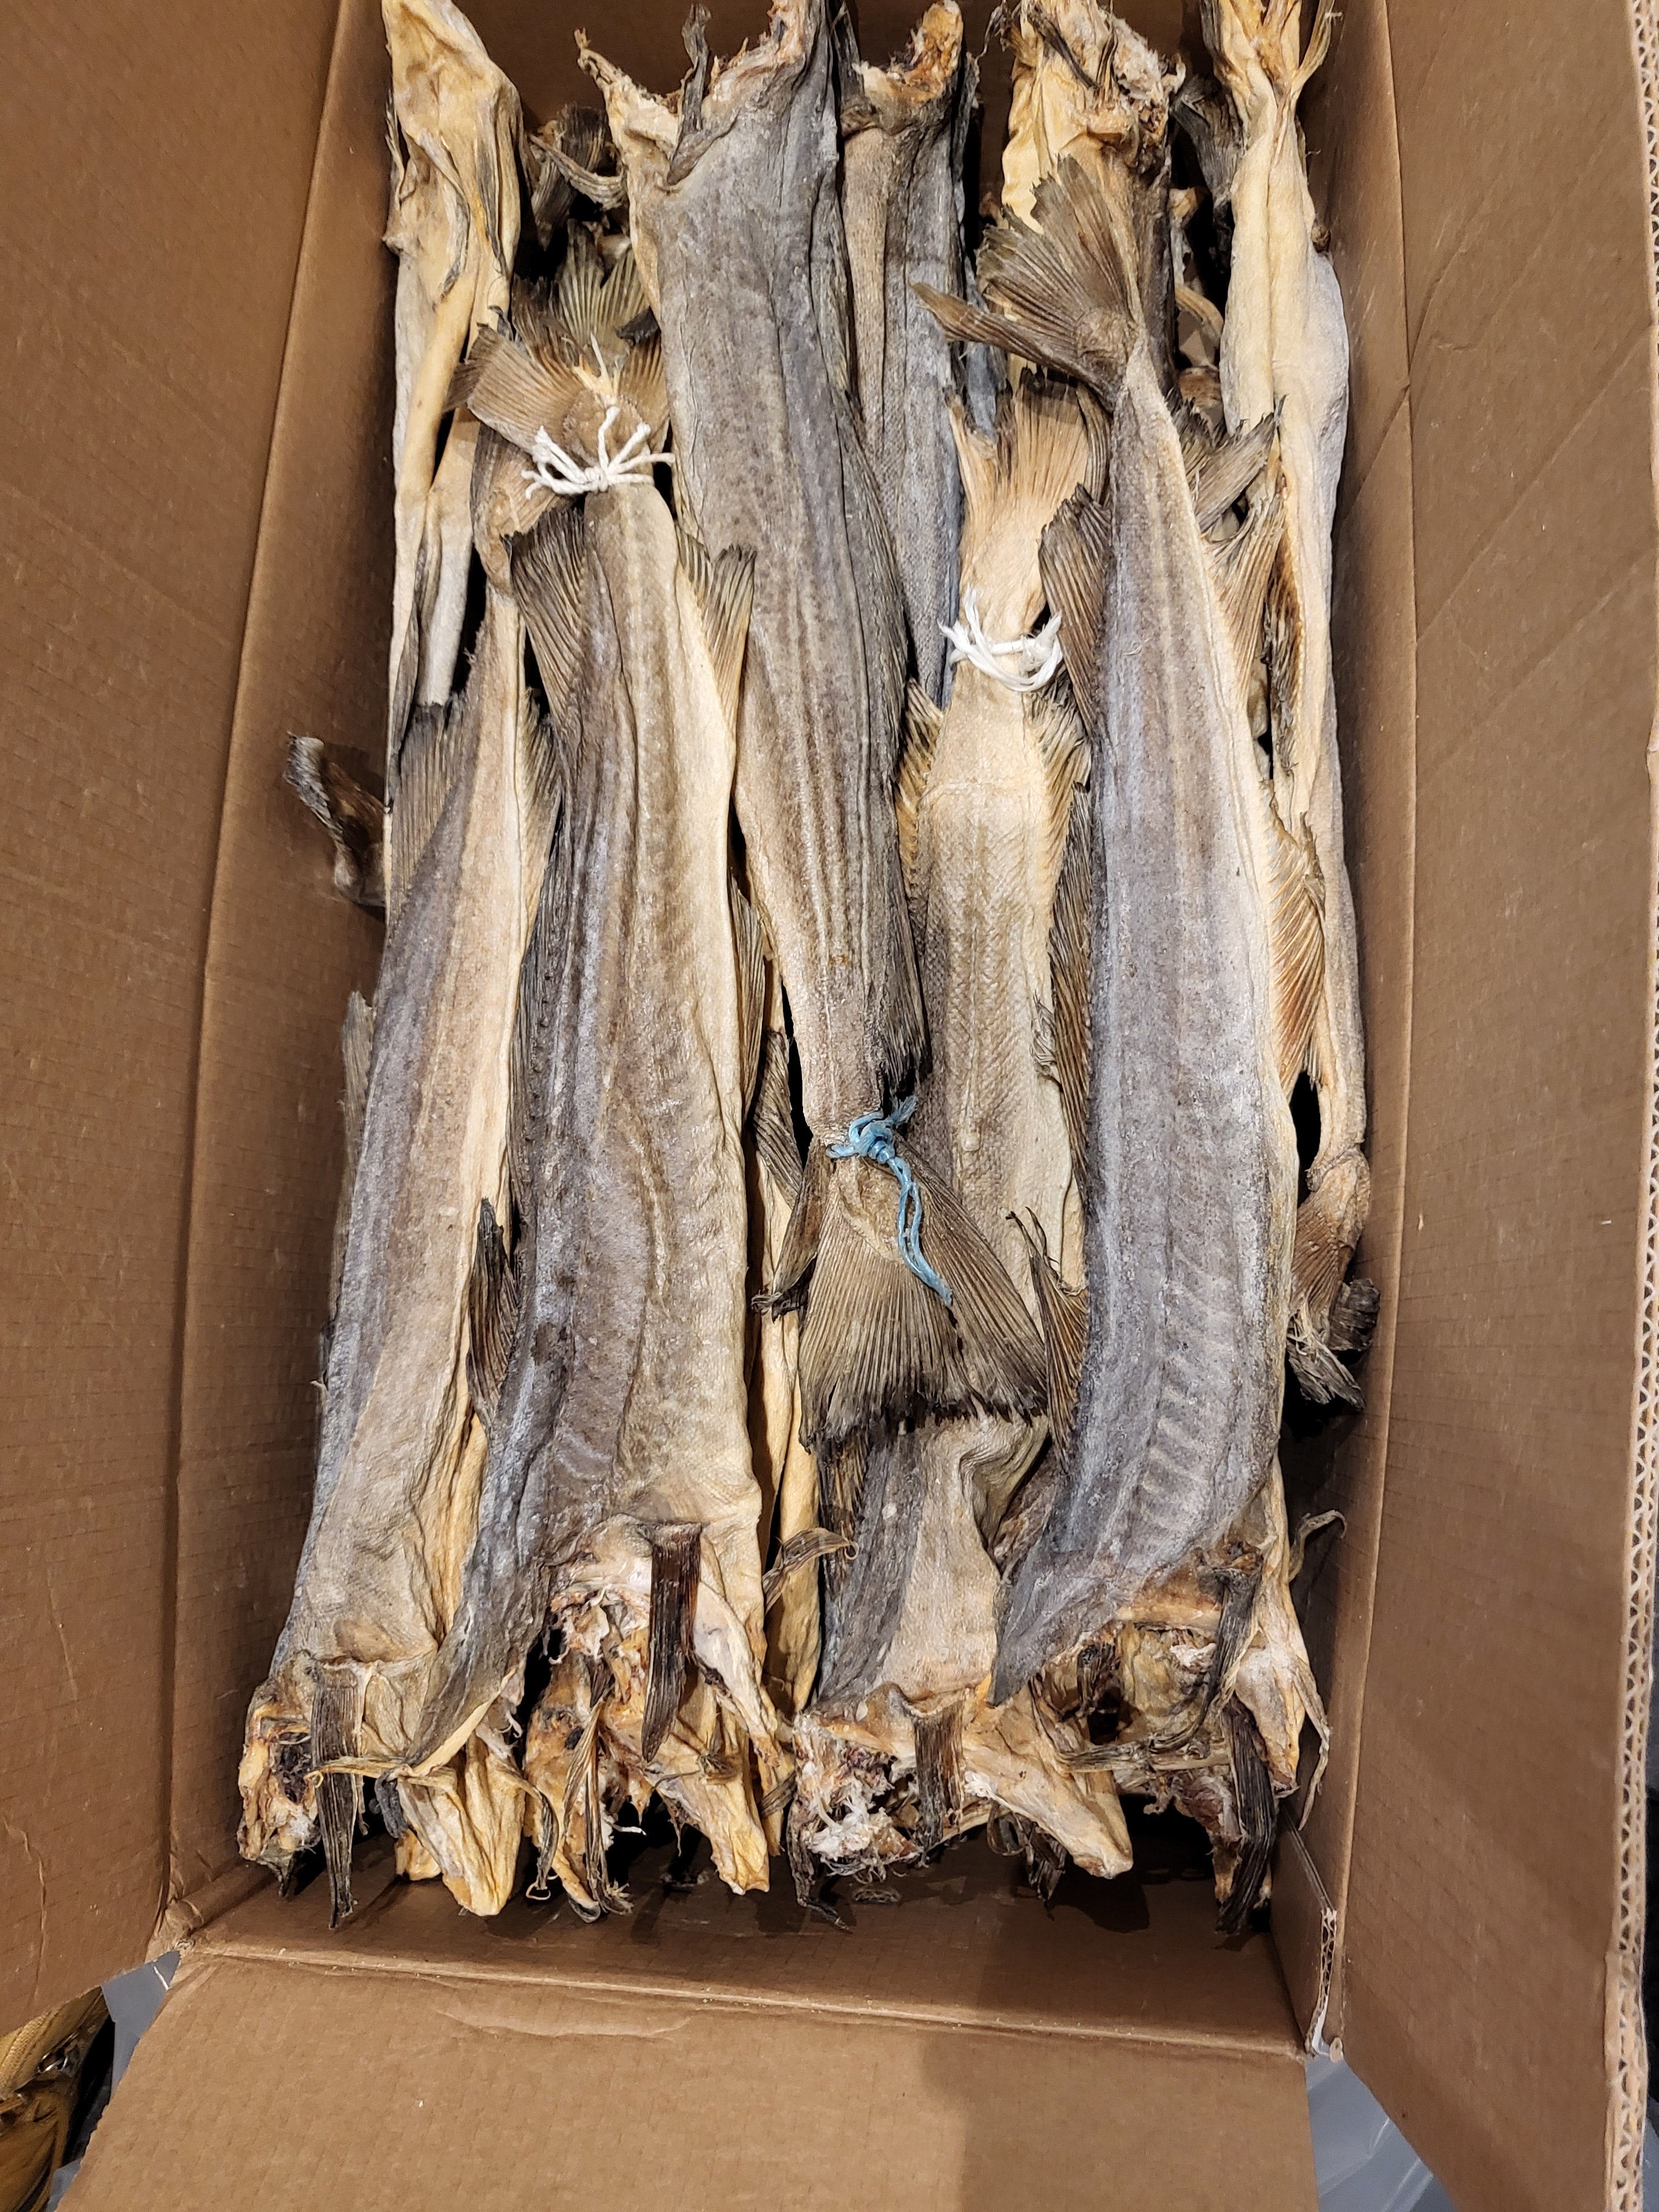 Stockfish Dried fish and caviar. 25 lbs or 11,5kg 5kg fish and 6,5 kg caviar